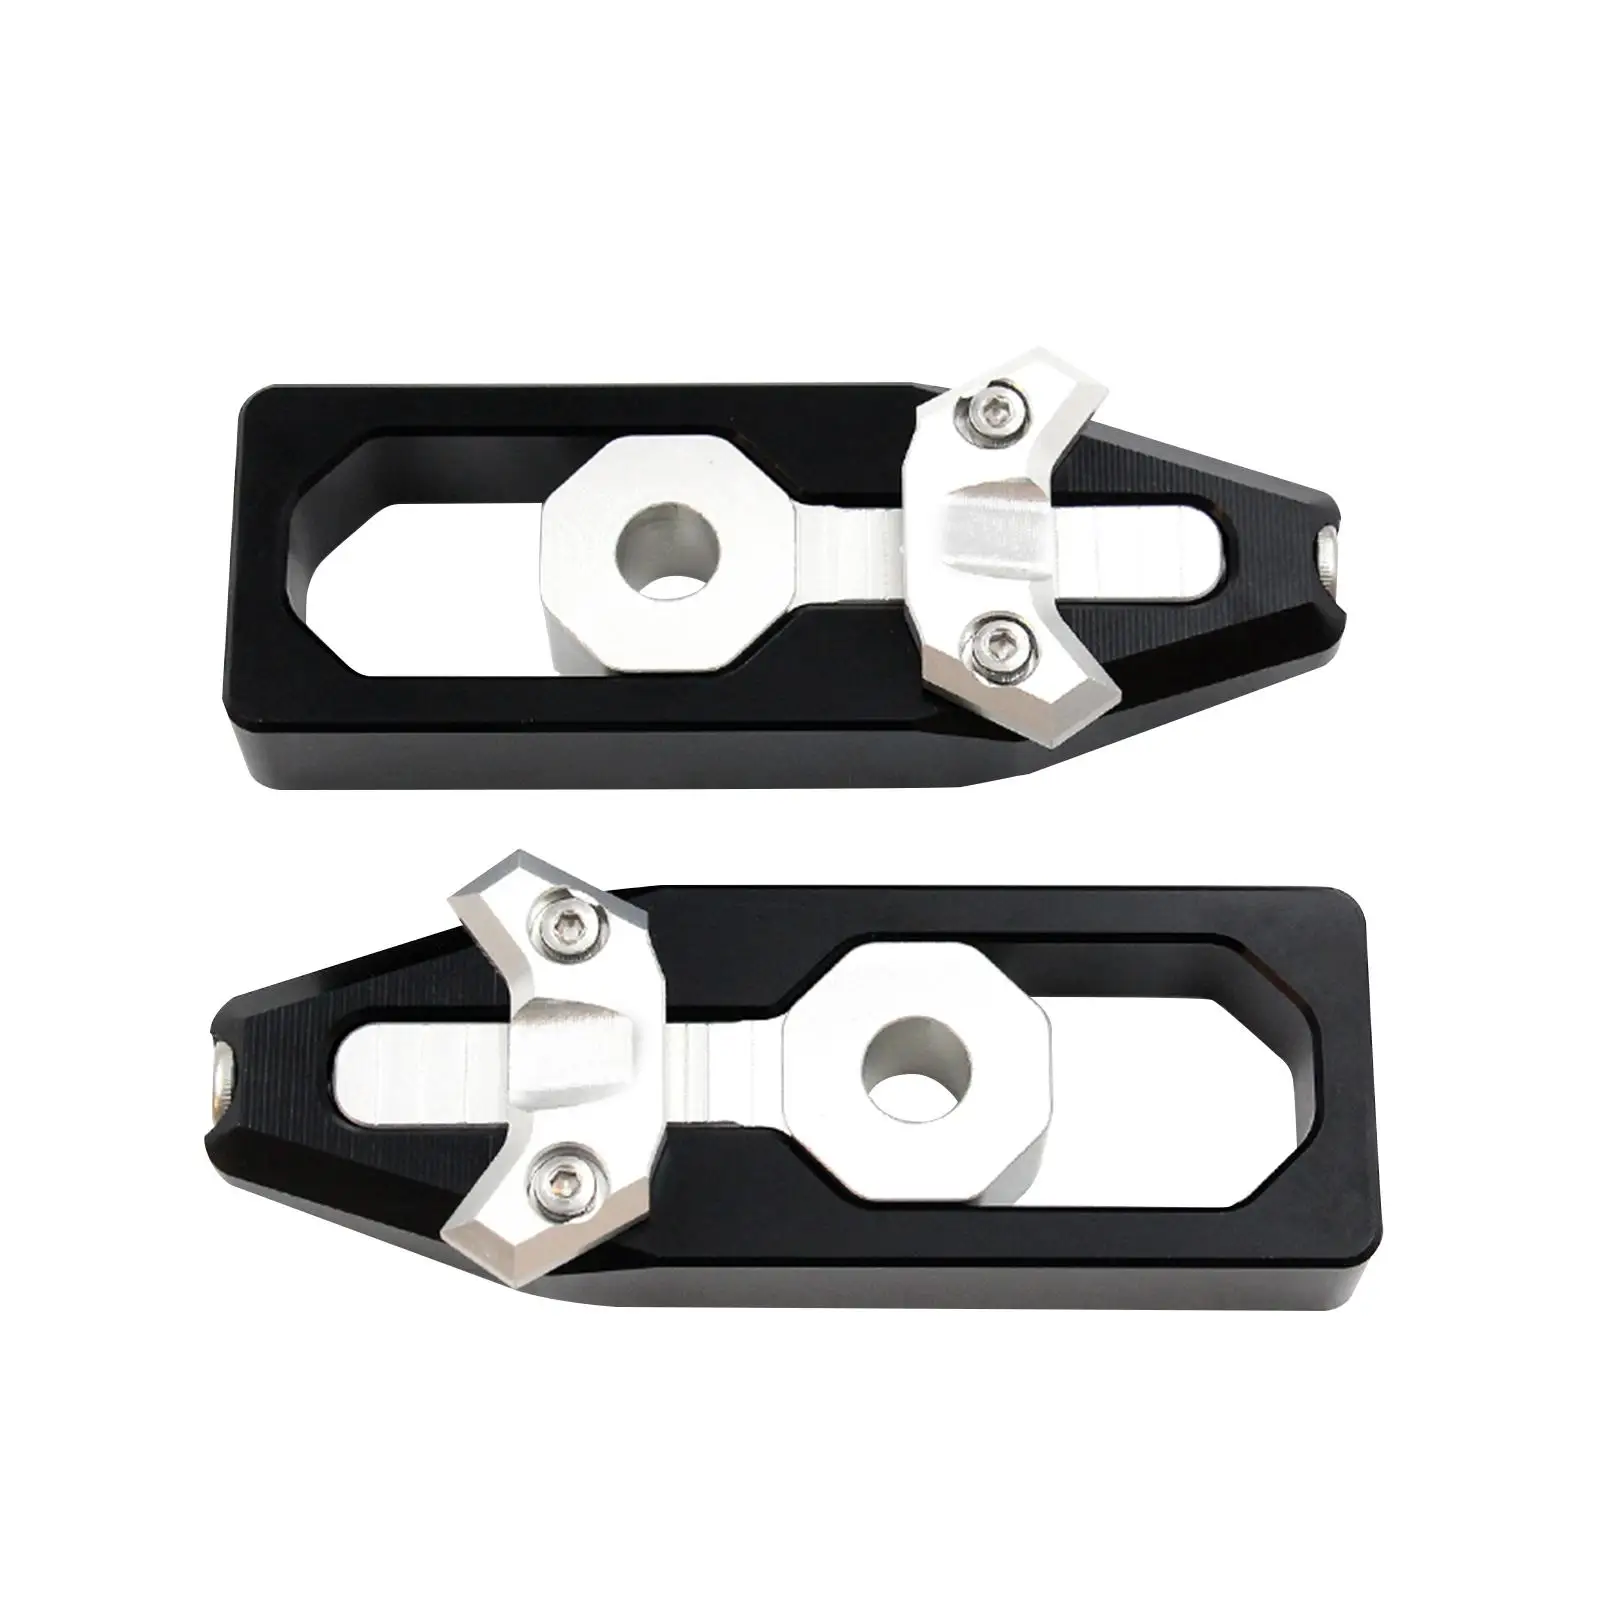 2 Pieces Motor Chain Adjuster set Aluminum Alloy Easy to Install Chain Tensioner for honda 2014-2020 Grom Replacement Parts